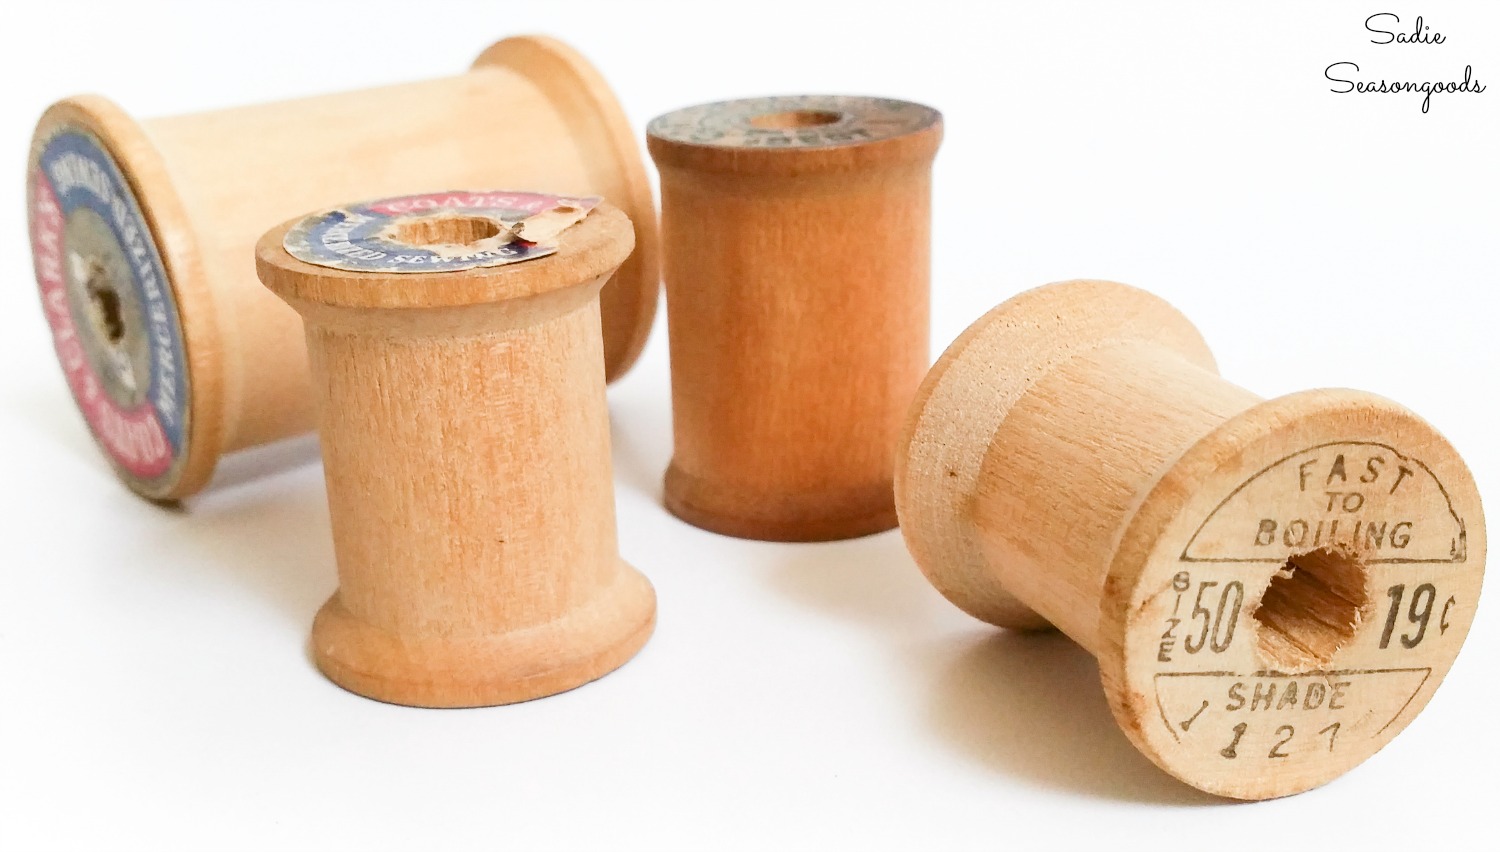 7 Wooden Spool Crafts ideas  wooden spool crafts, spool crafts, wooden  spools